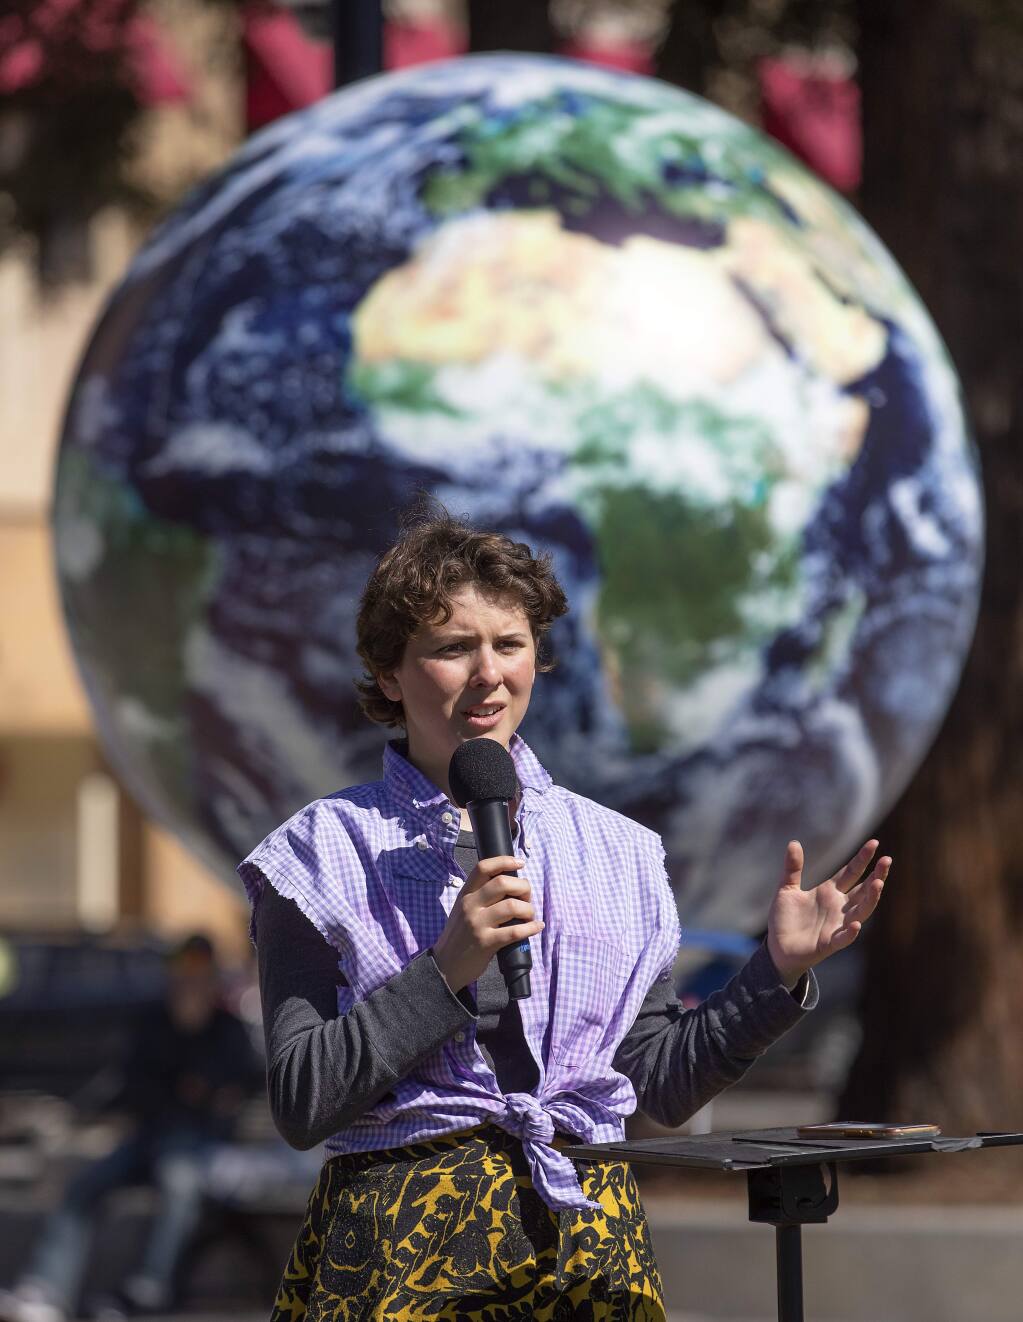 Student leader Lucy London, 17, a senior at the Marin School of the Arts, speaks to a crowd in Courthouse square to demand action against climate change during a rally in Santa Rosa on Friday. The rally was a coordinated event with students around the U.S. and the world. (photo by John Burgess/The Press Democrat)